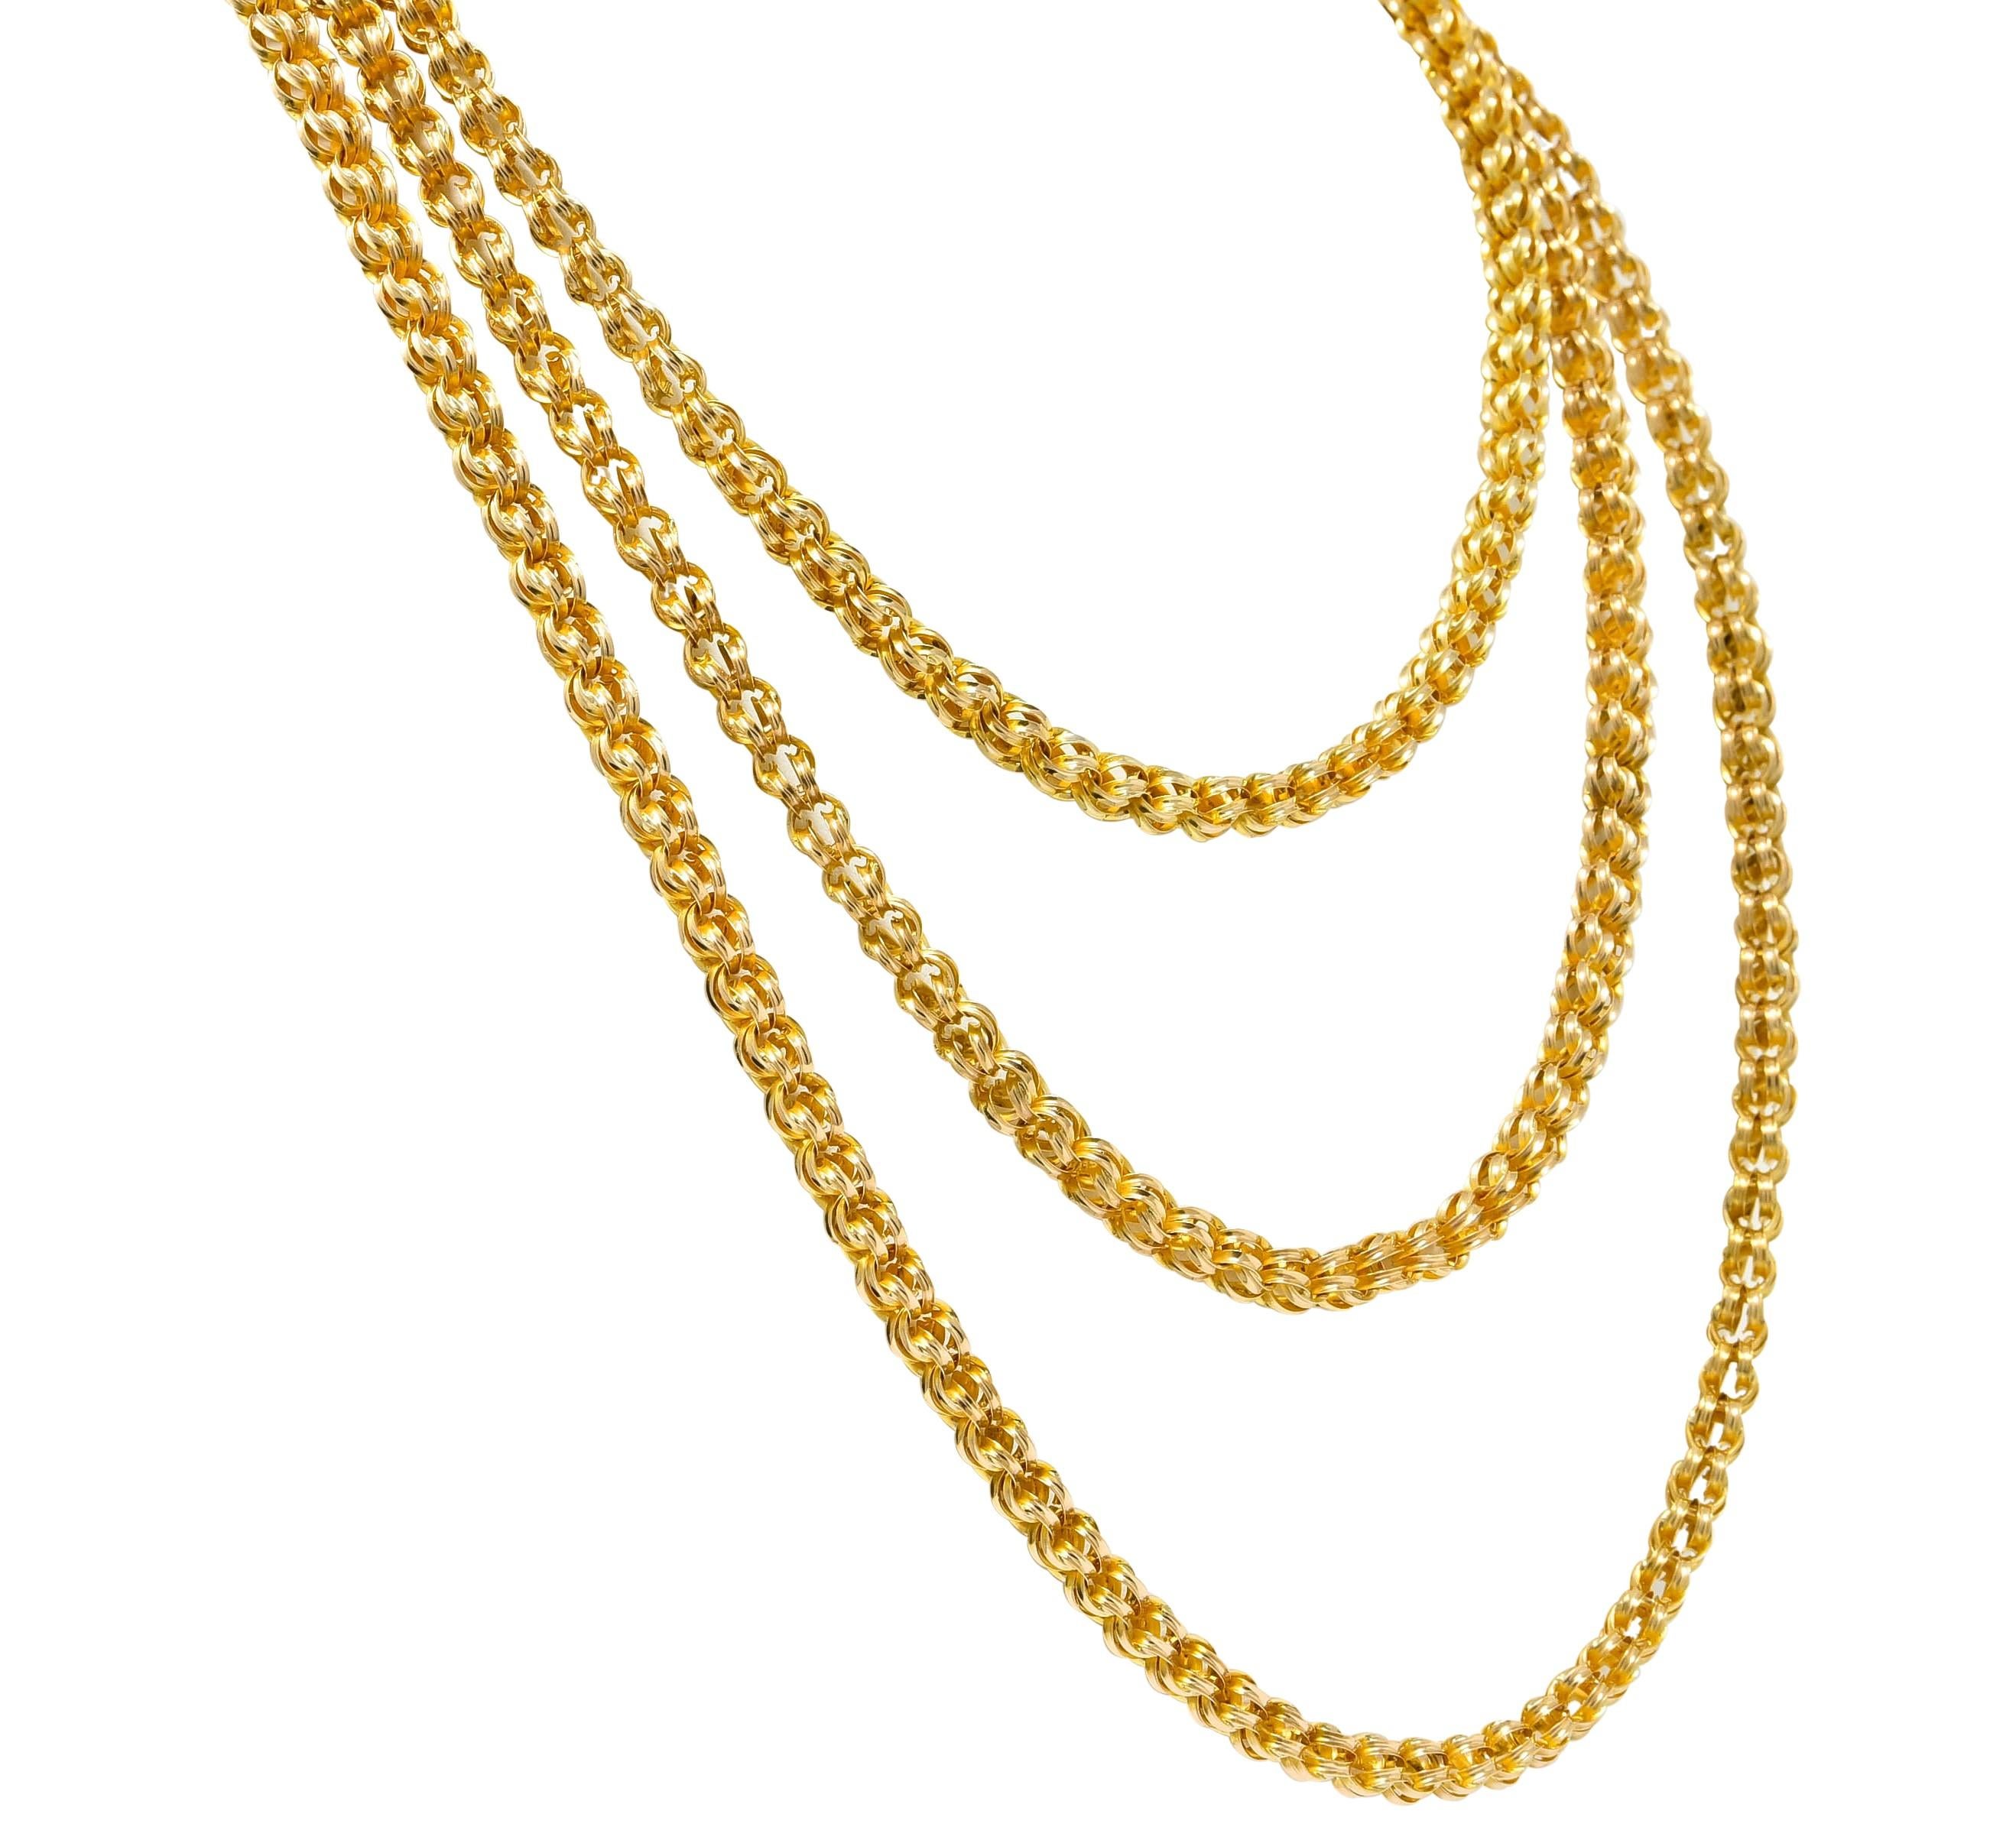 Long chain necklace comprised of two diverging round links, intersecting perpendicularly throughout

Links are grooved with a high polish

Completed by a hinged lobster with ridged yoke

With maker's mark and tested as 14 karat gold

Circa